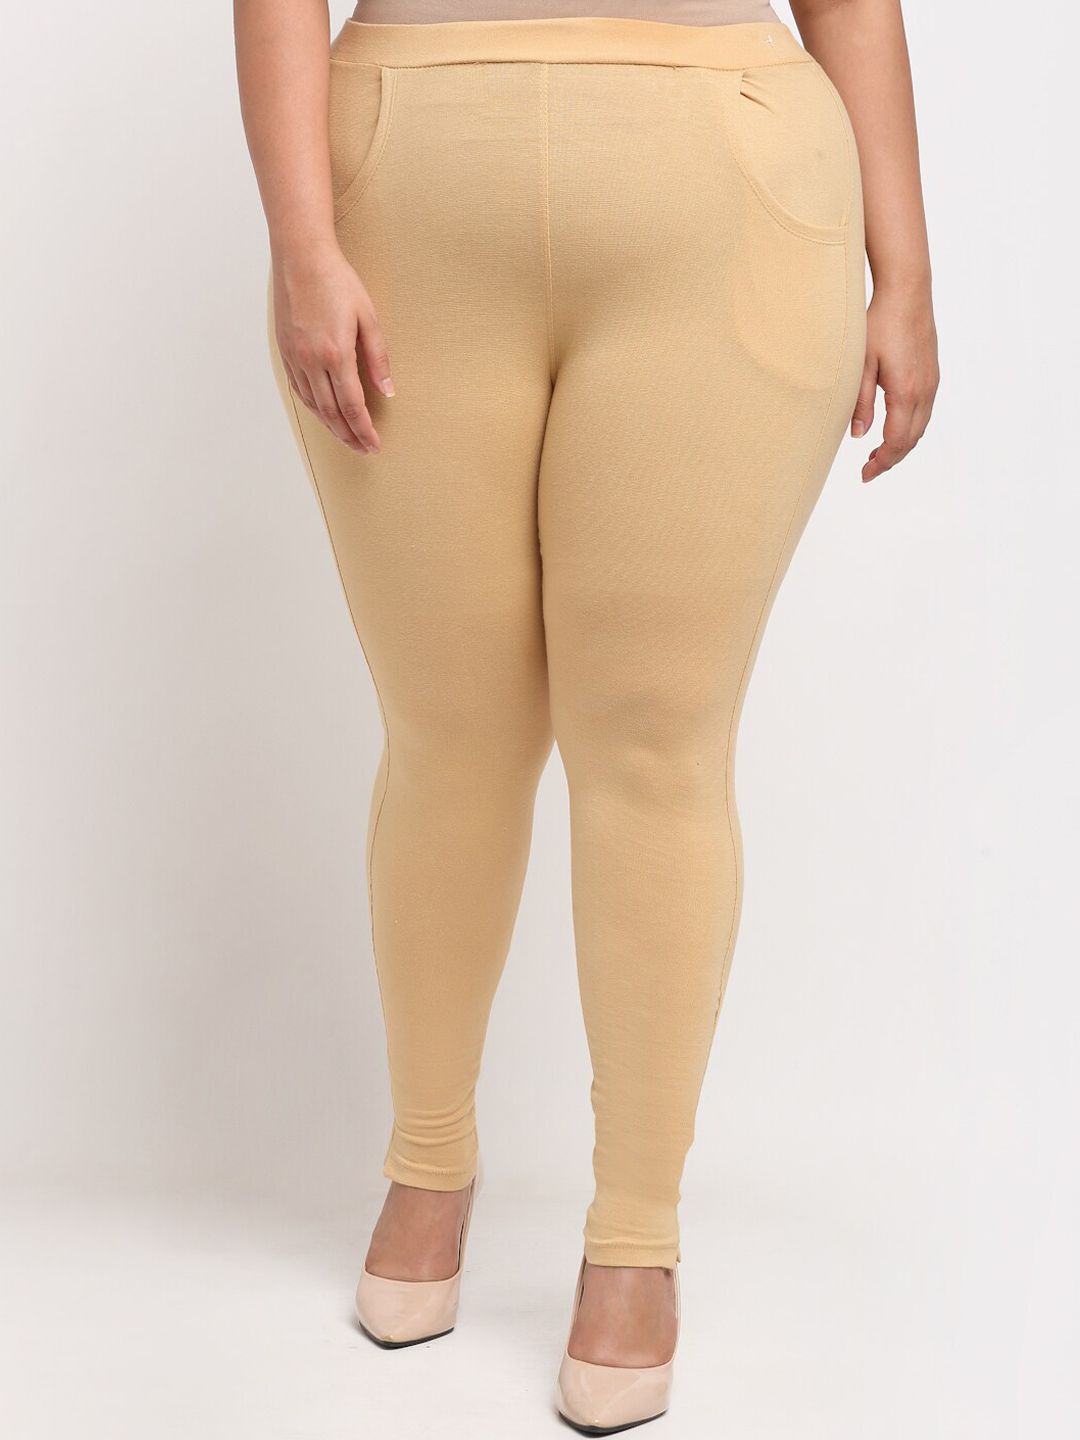 TAG 7 PLUS Women Beige Cotton Ankle Length Leggings Price in India